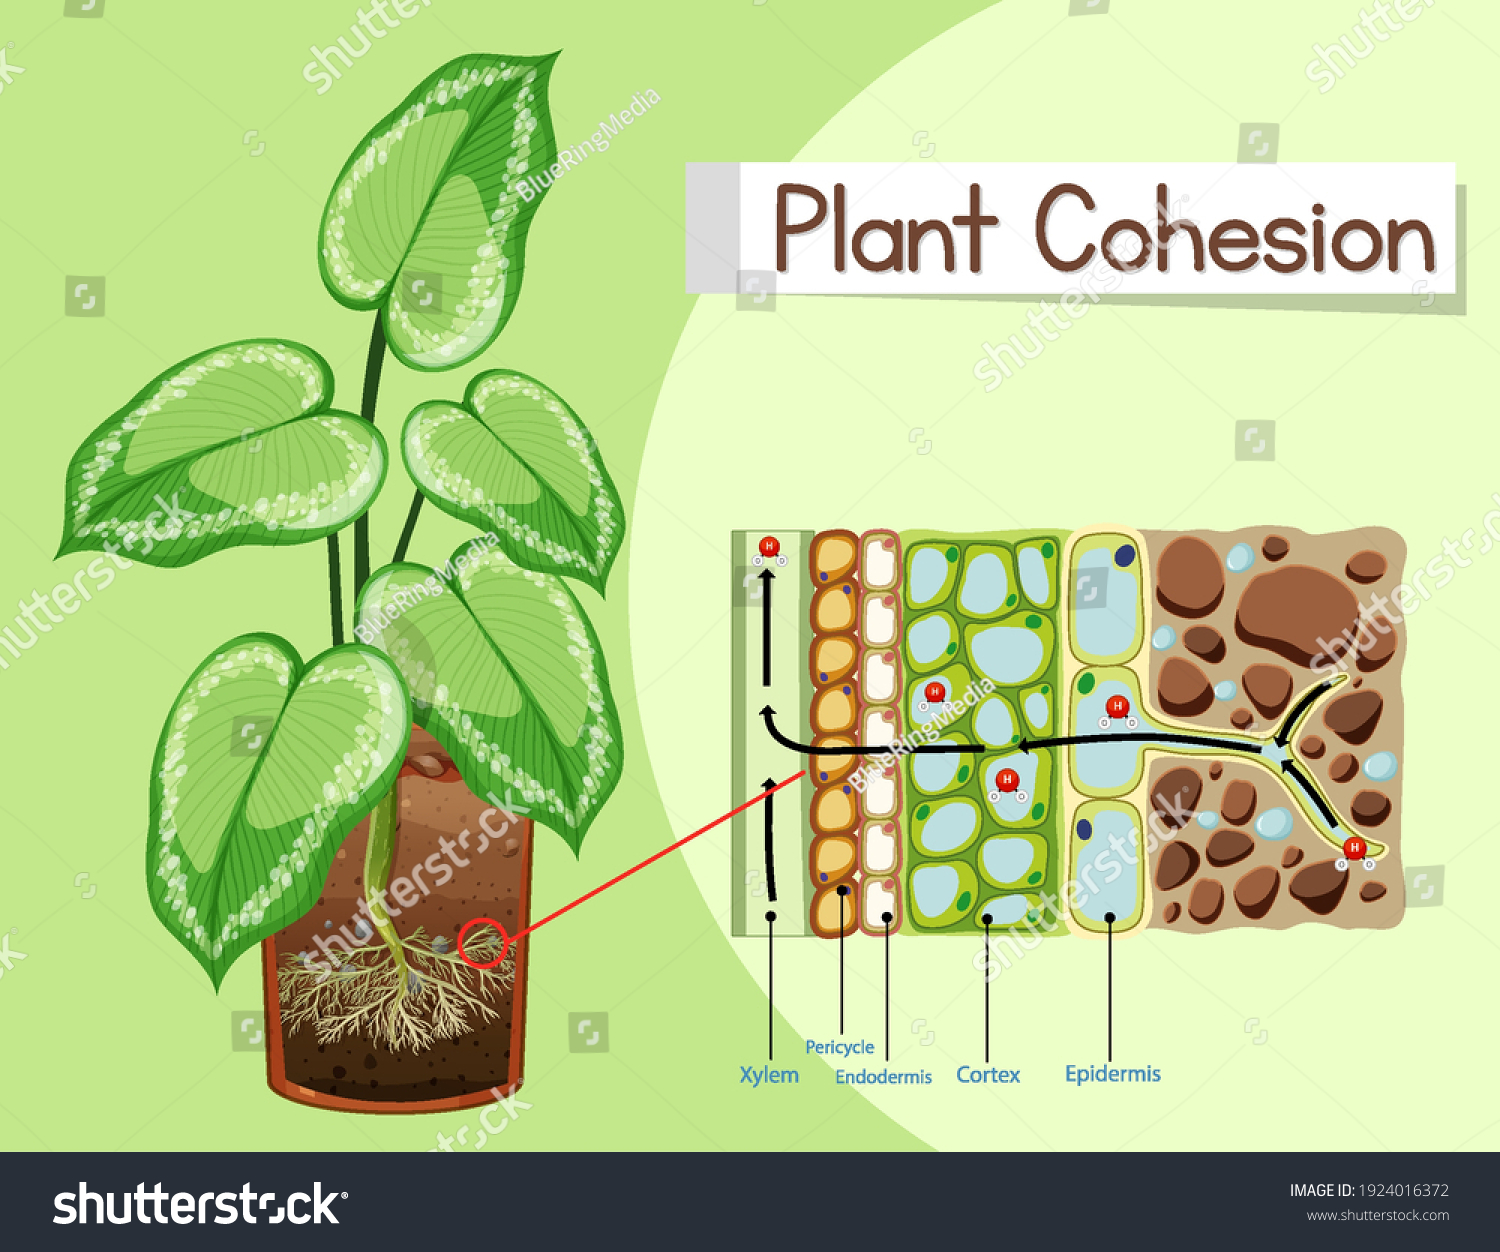 Diagram Showing Plant Cohesion Illustration Stock Vector (Royalty Free ...